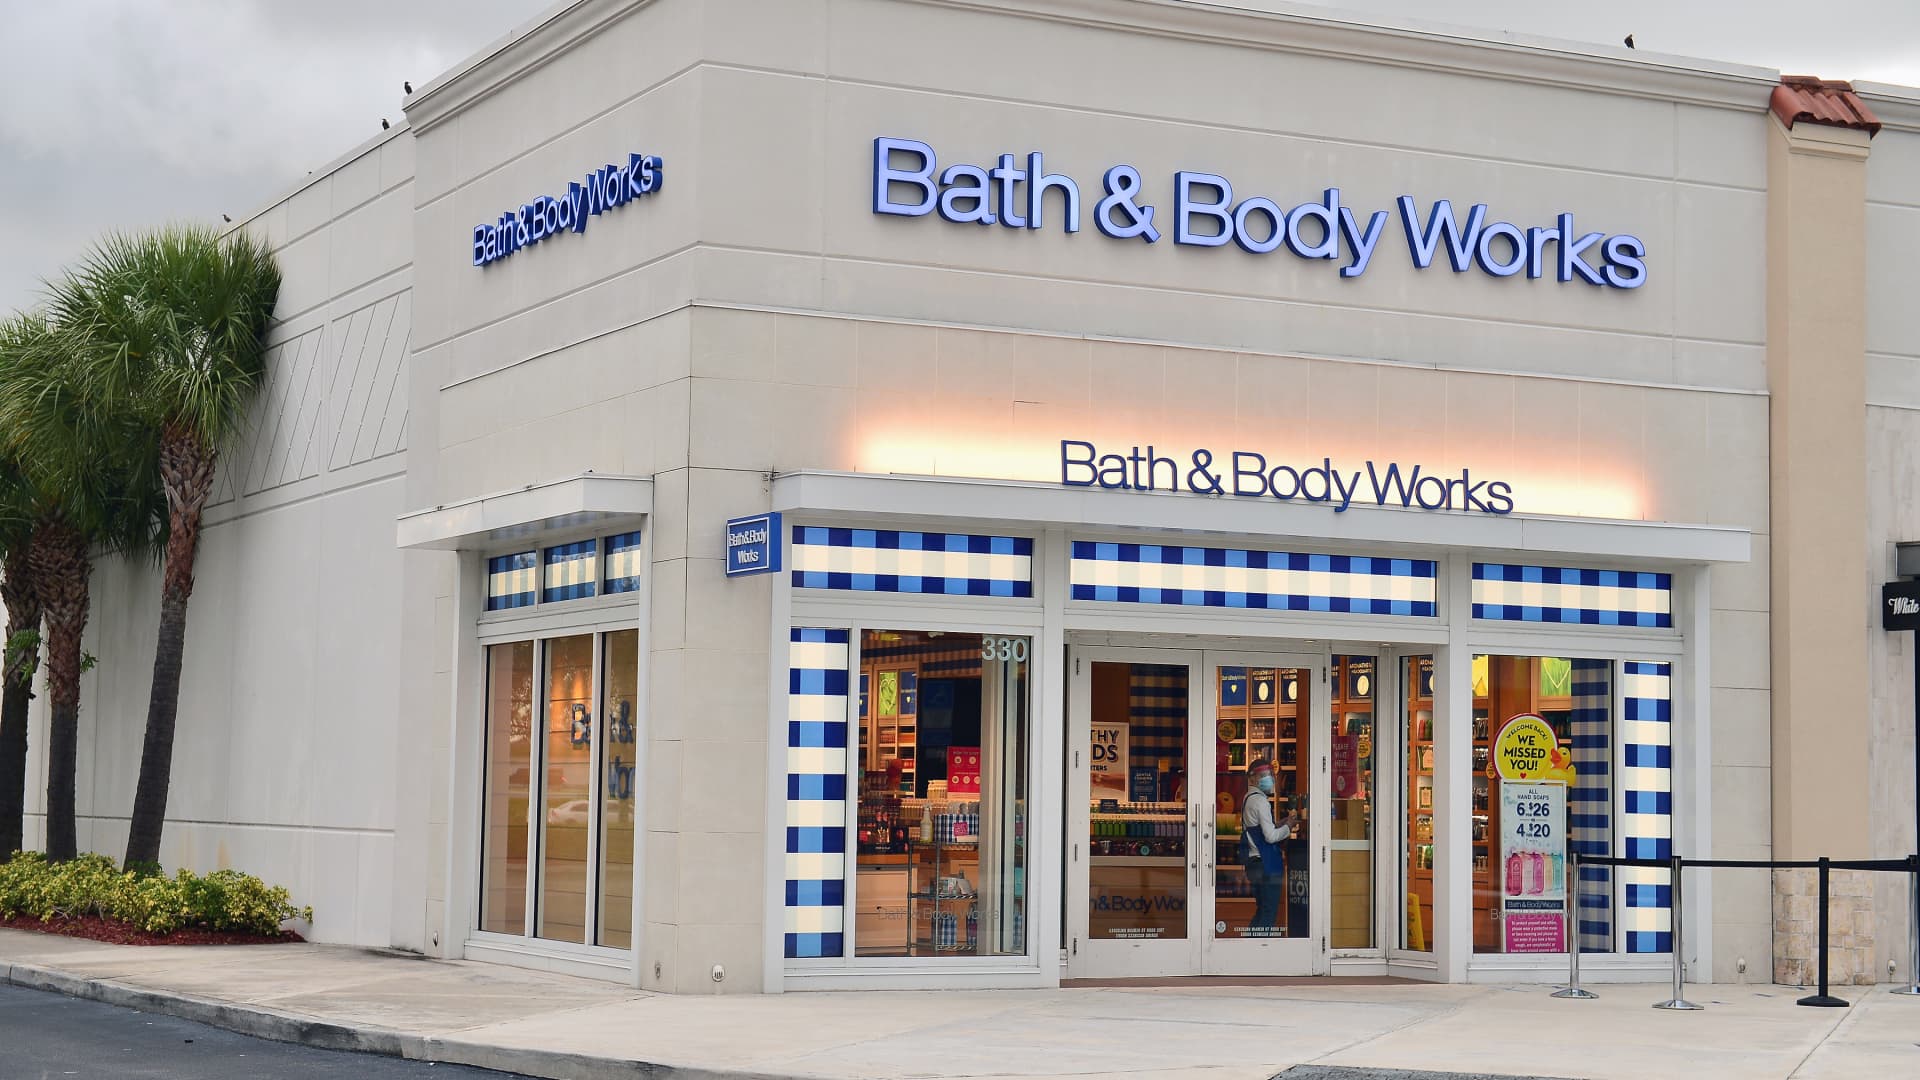 Third Point’s Dan Loeb pens a pointed letter to Bath & Body Works – What could happen next